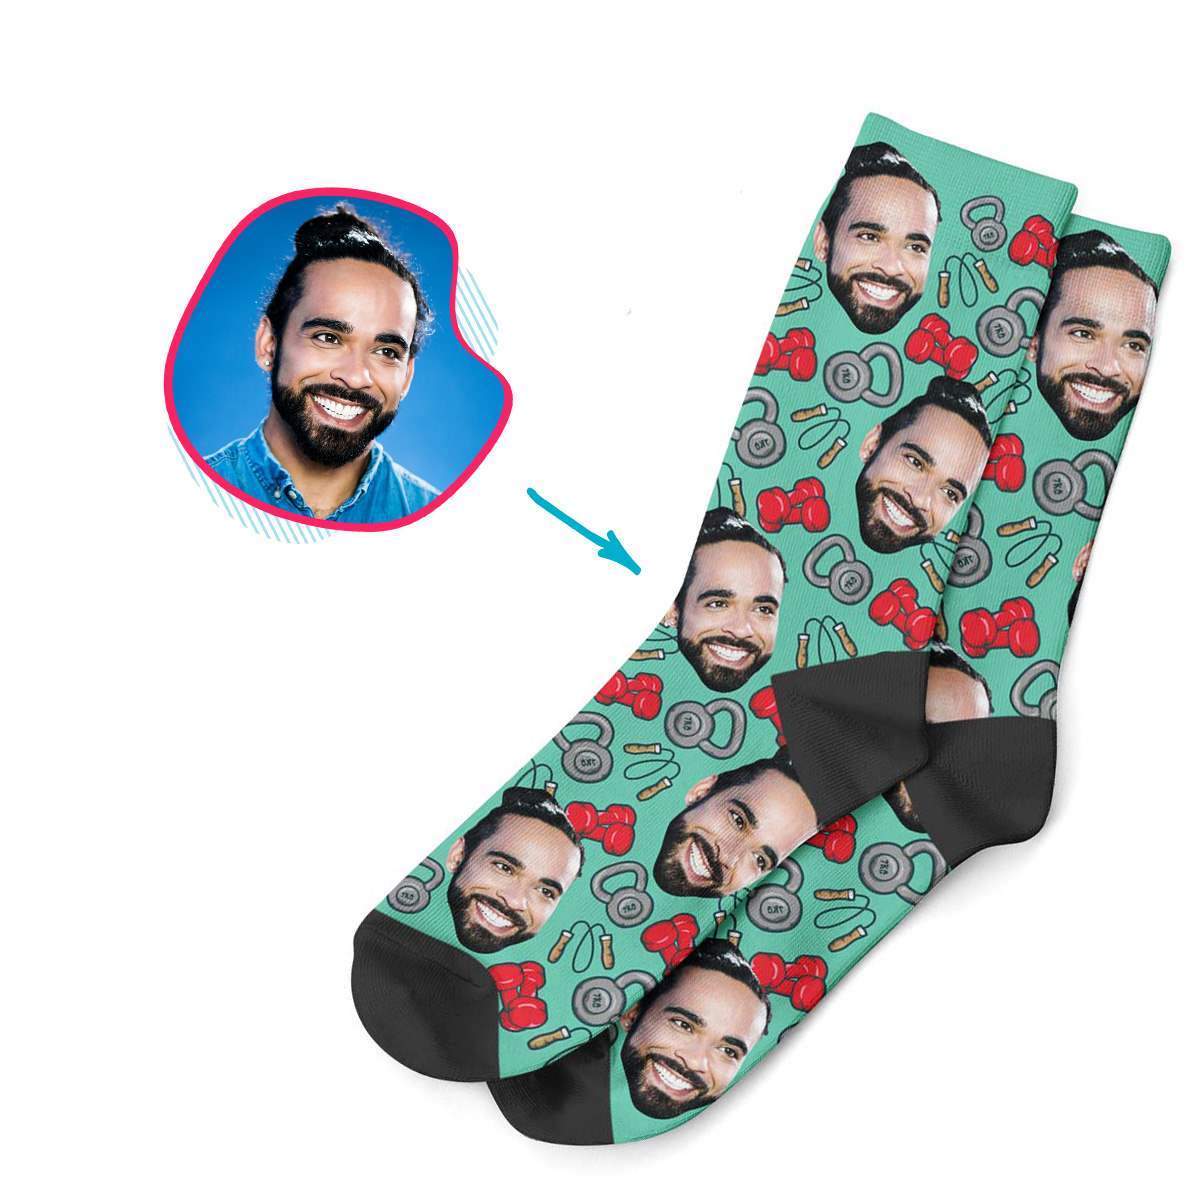 mint Gym & Fitness socks personalized with photo of face printed on them